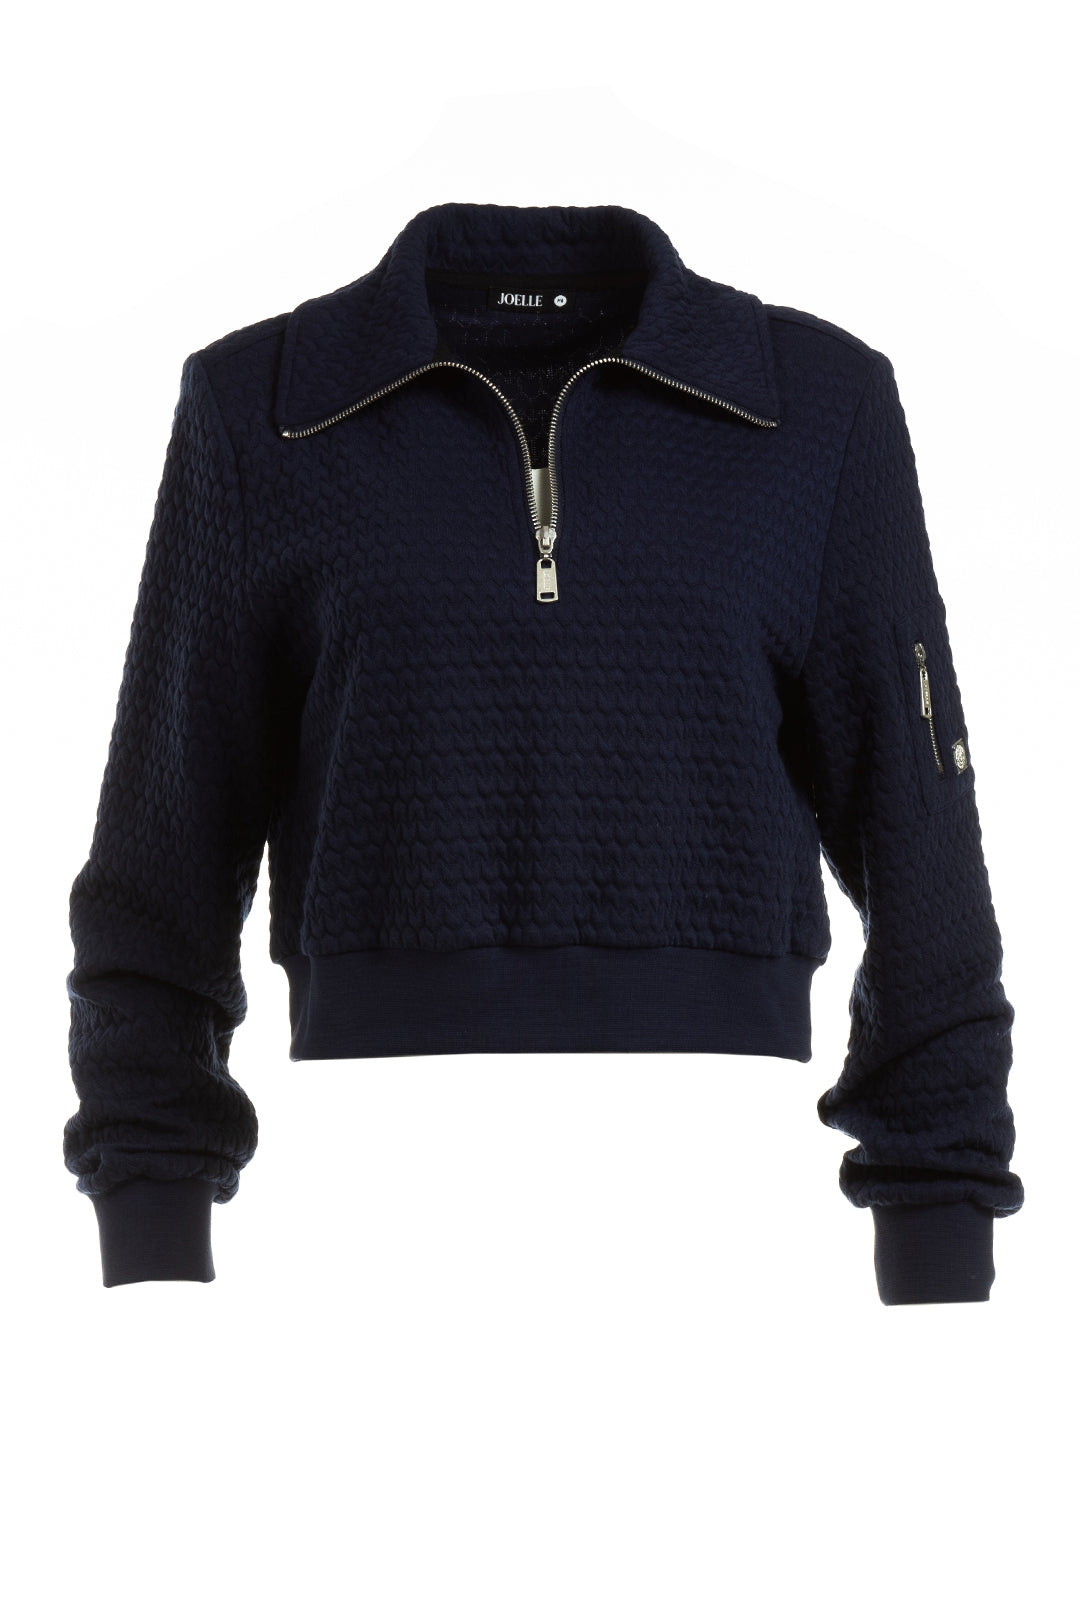 Textured navy blue cropped sweater | Murray